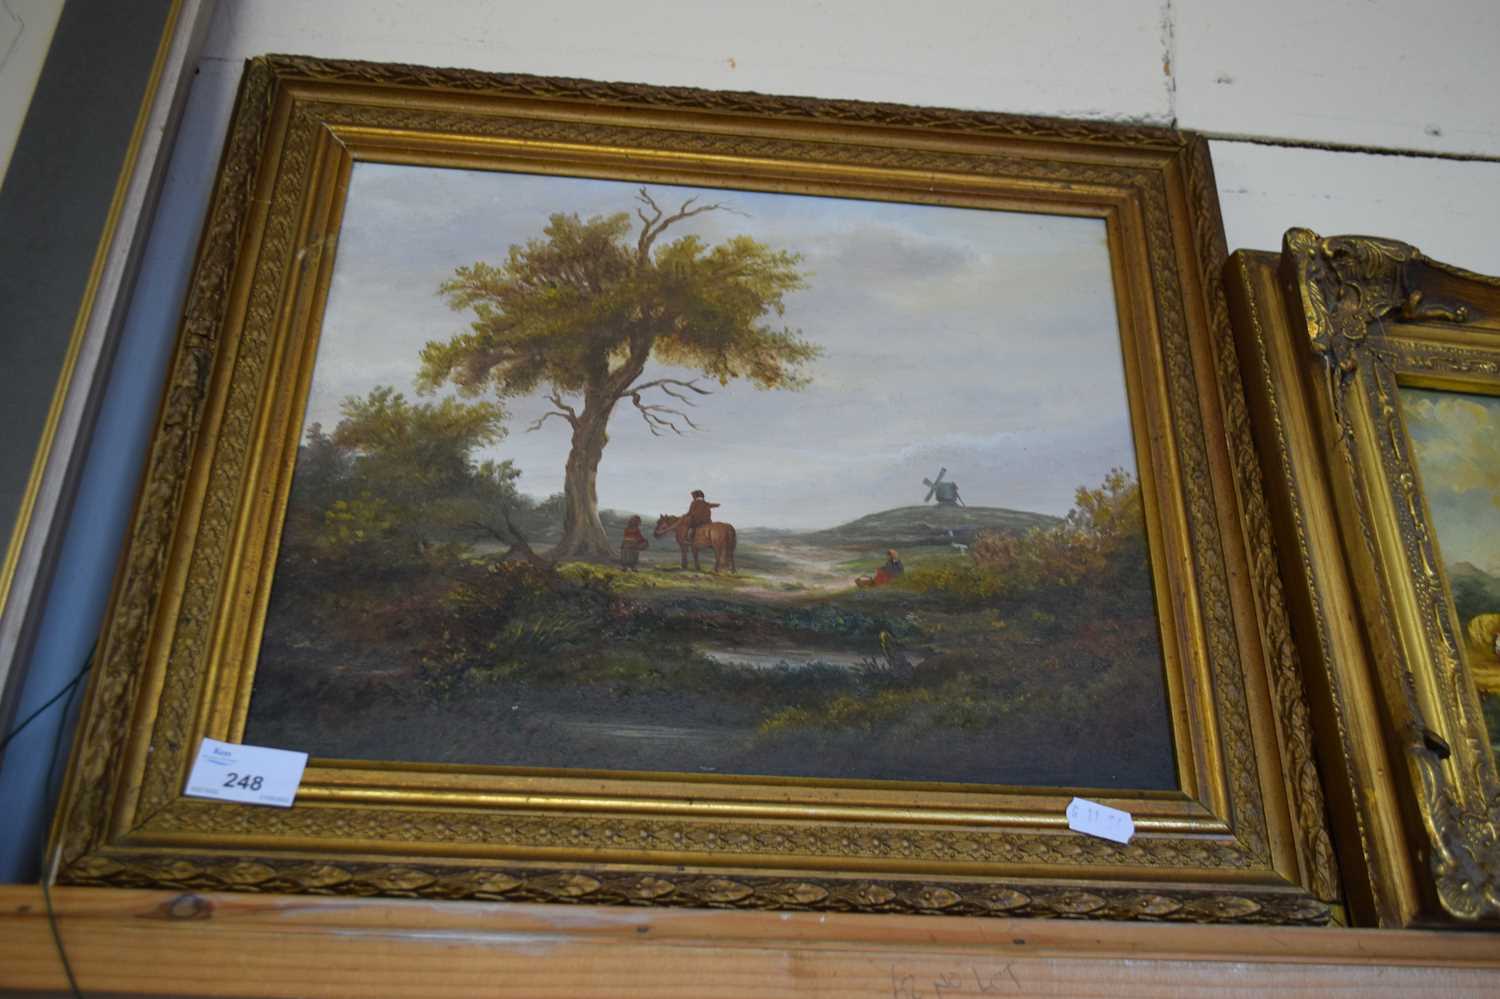 20TH CENTURY SCHOOL STUDY OF FIGURES ON A COUNTRY LANE, OIL ON BOARD, UNSIGNED, GILT FRAMED